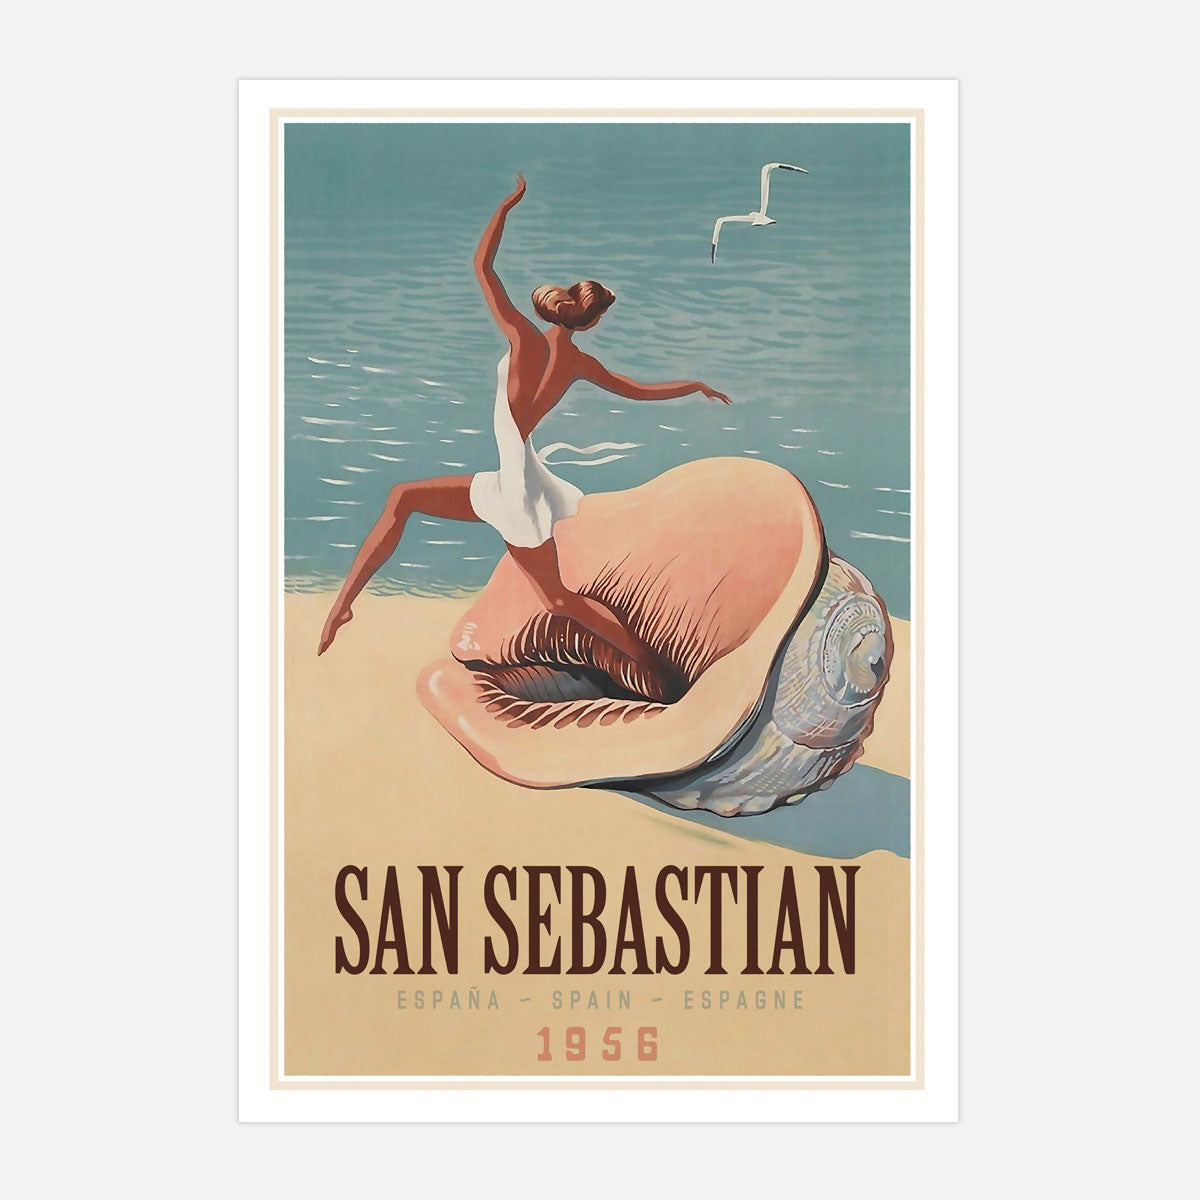 San Sebastian vintage retro advertising poster from Places We Luv